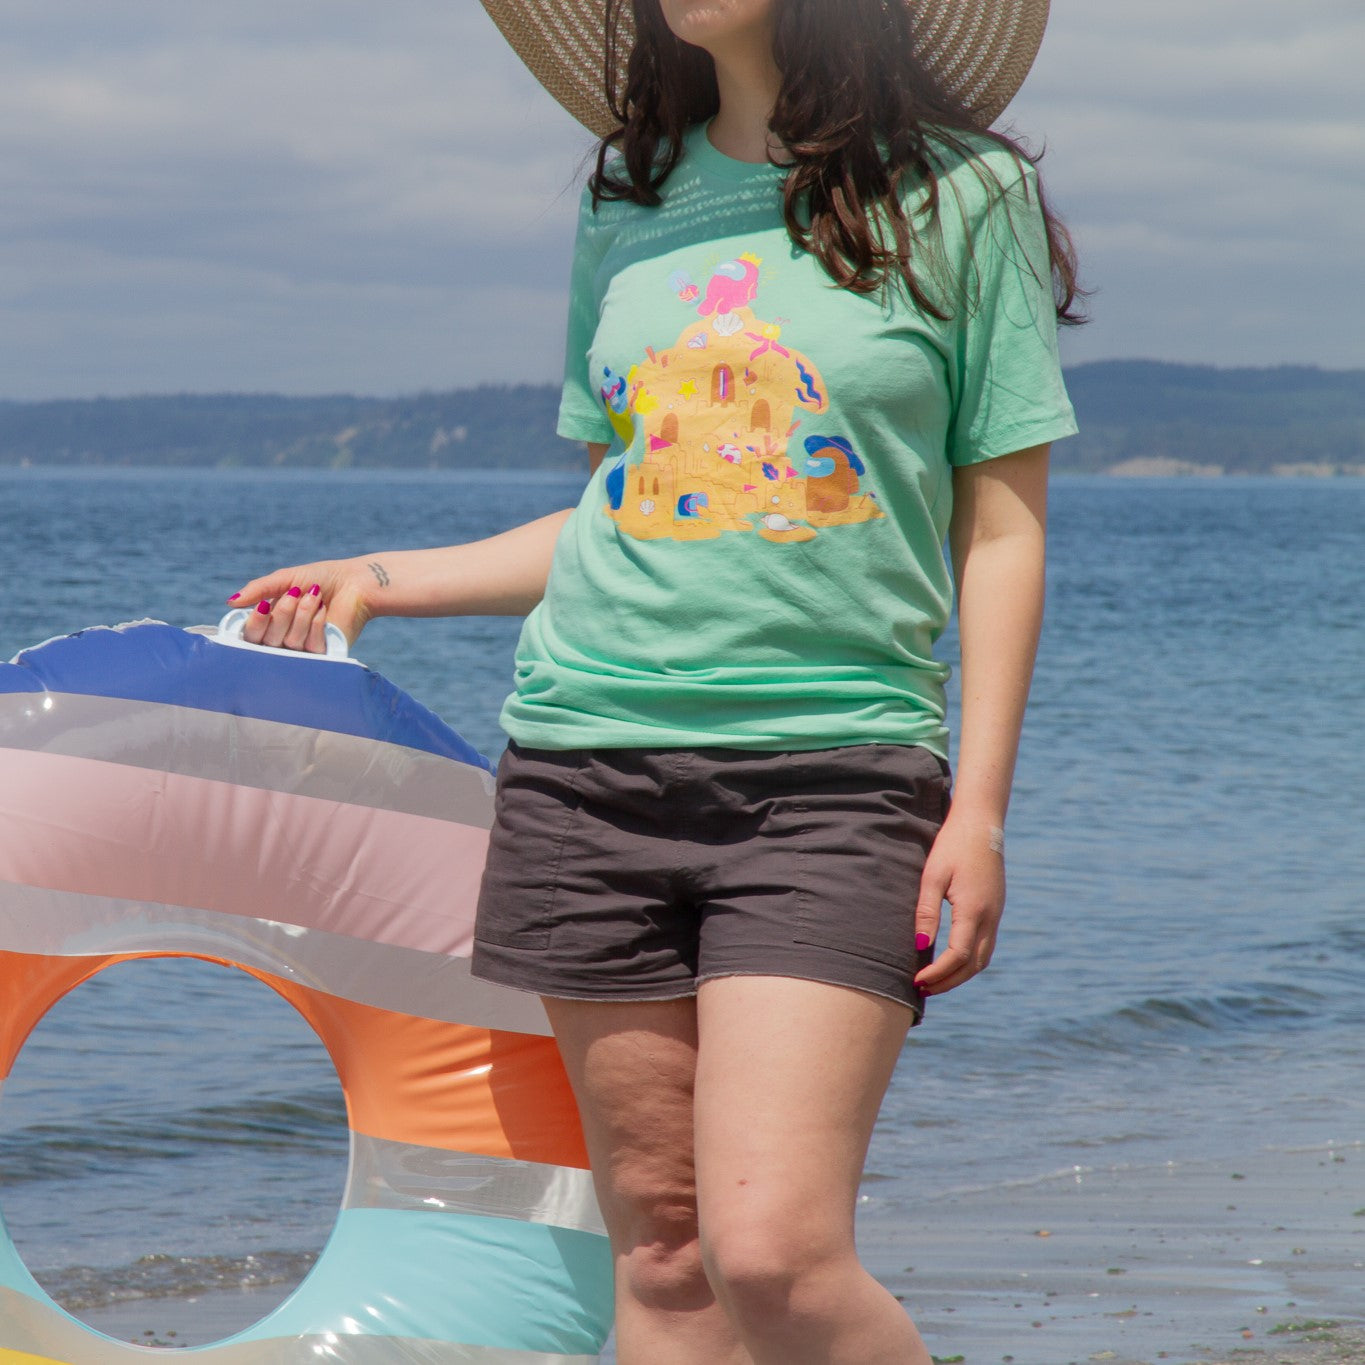  A product photo of the Among Us: Sandcastle Tee in Mint. The t-shirt is pistachio green and shows four crewmates building a sandcastle, which vaguely resembles the Airship. A pink crewmate wearing a crown hat sits at the top of the castle. 